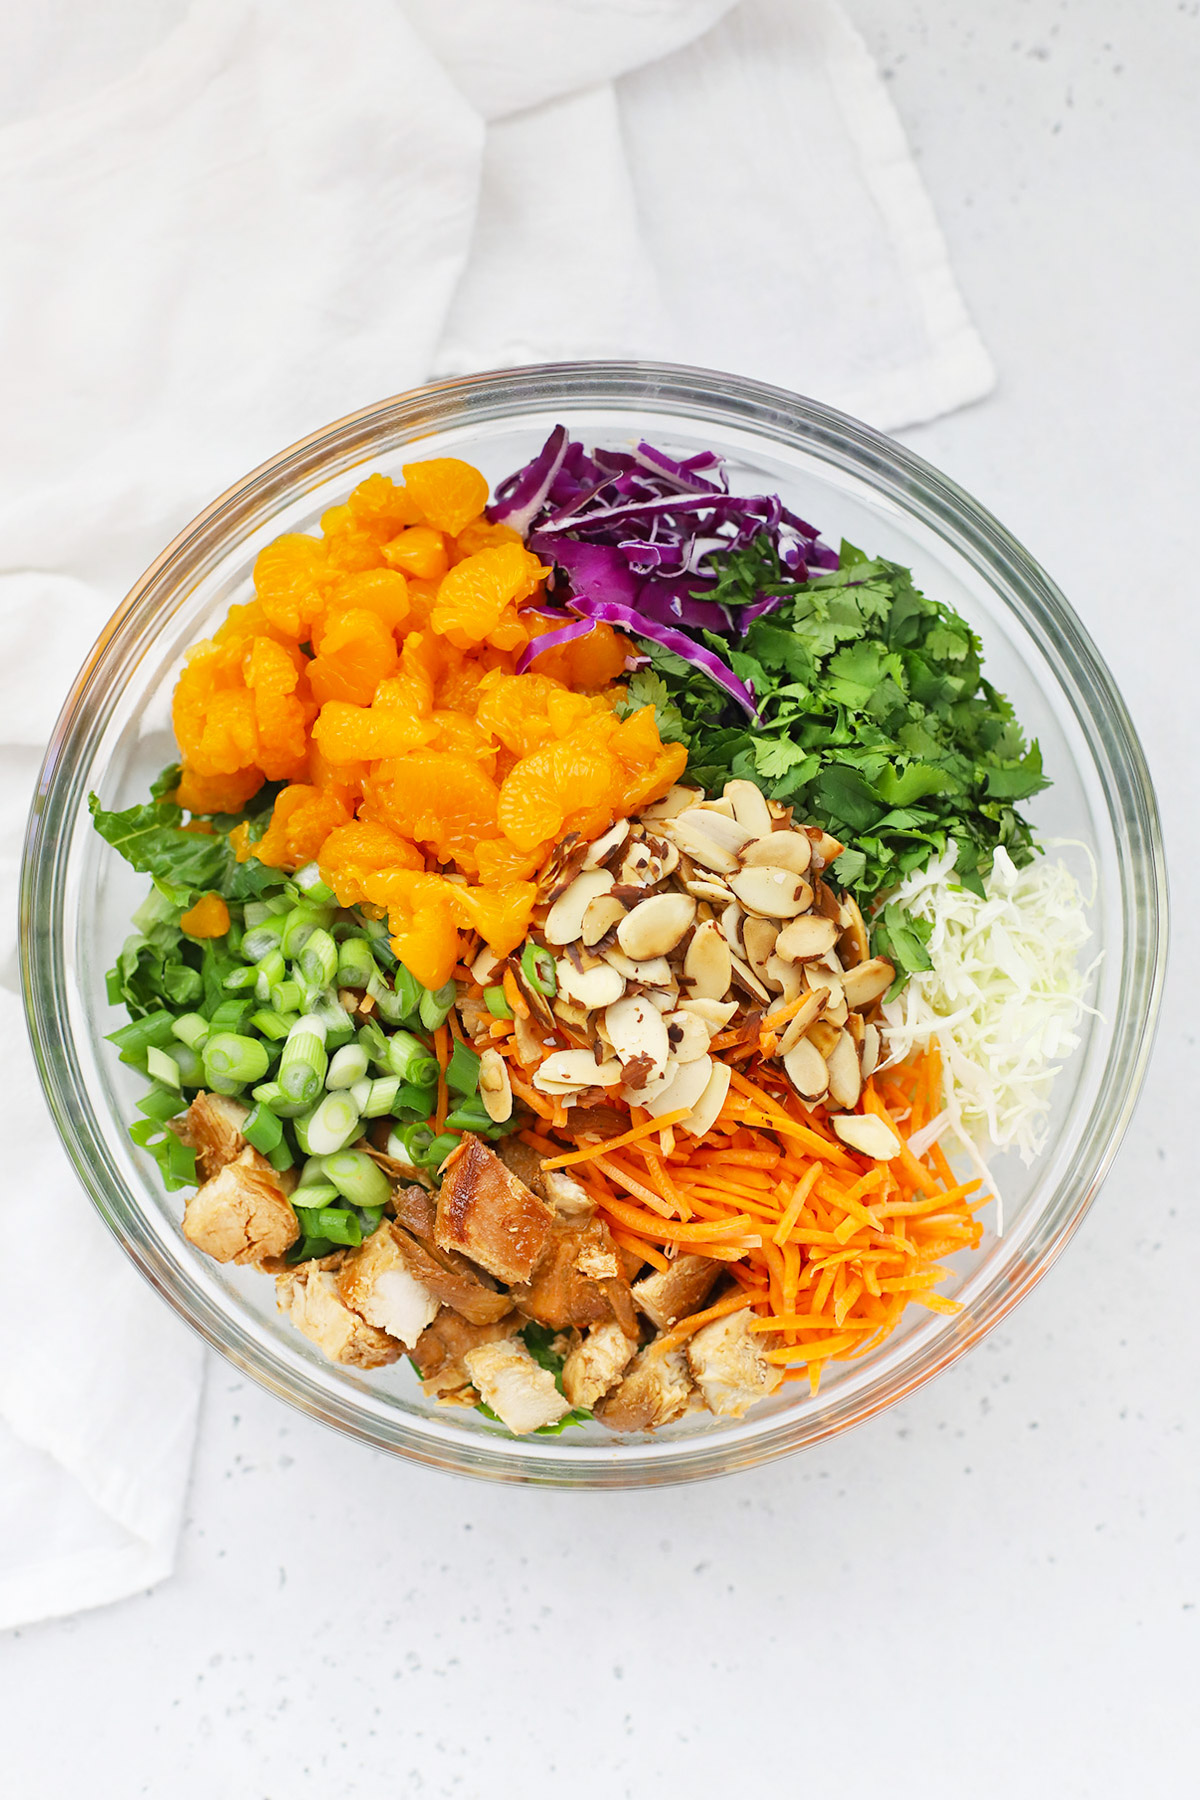 Overhead view of ingredients for Sesame Chicken Salad in a mixing bowl